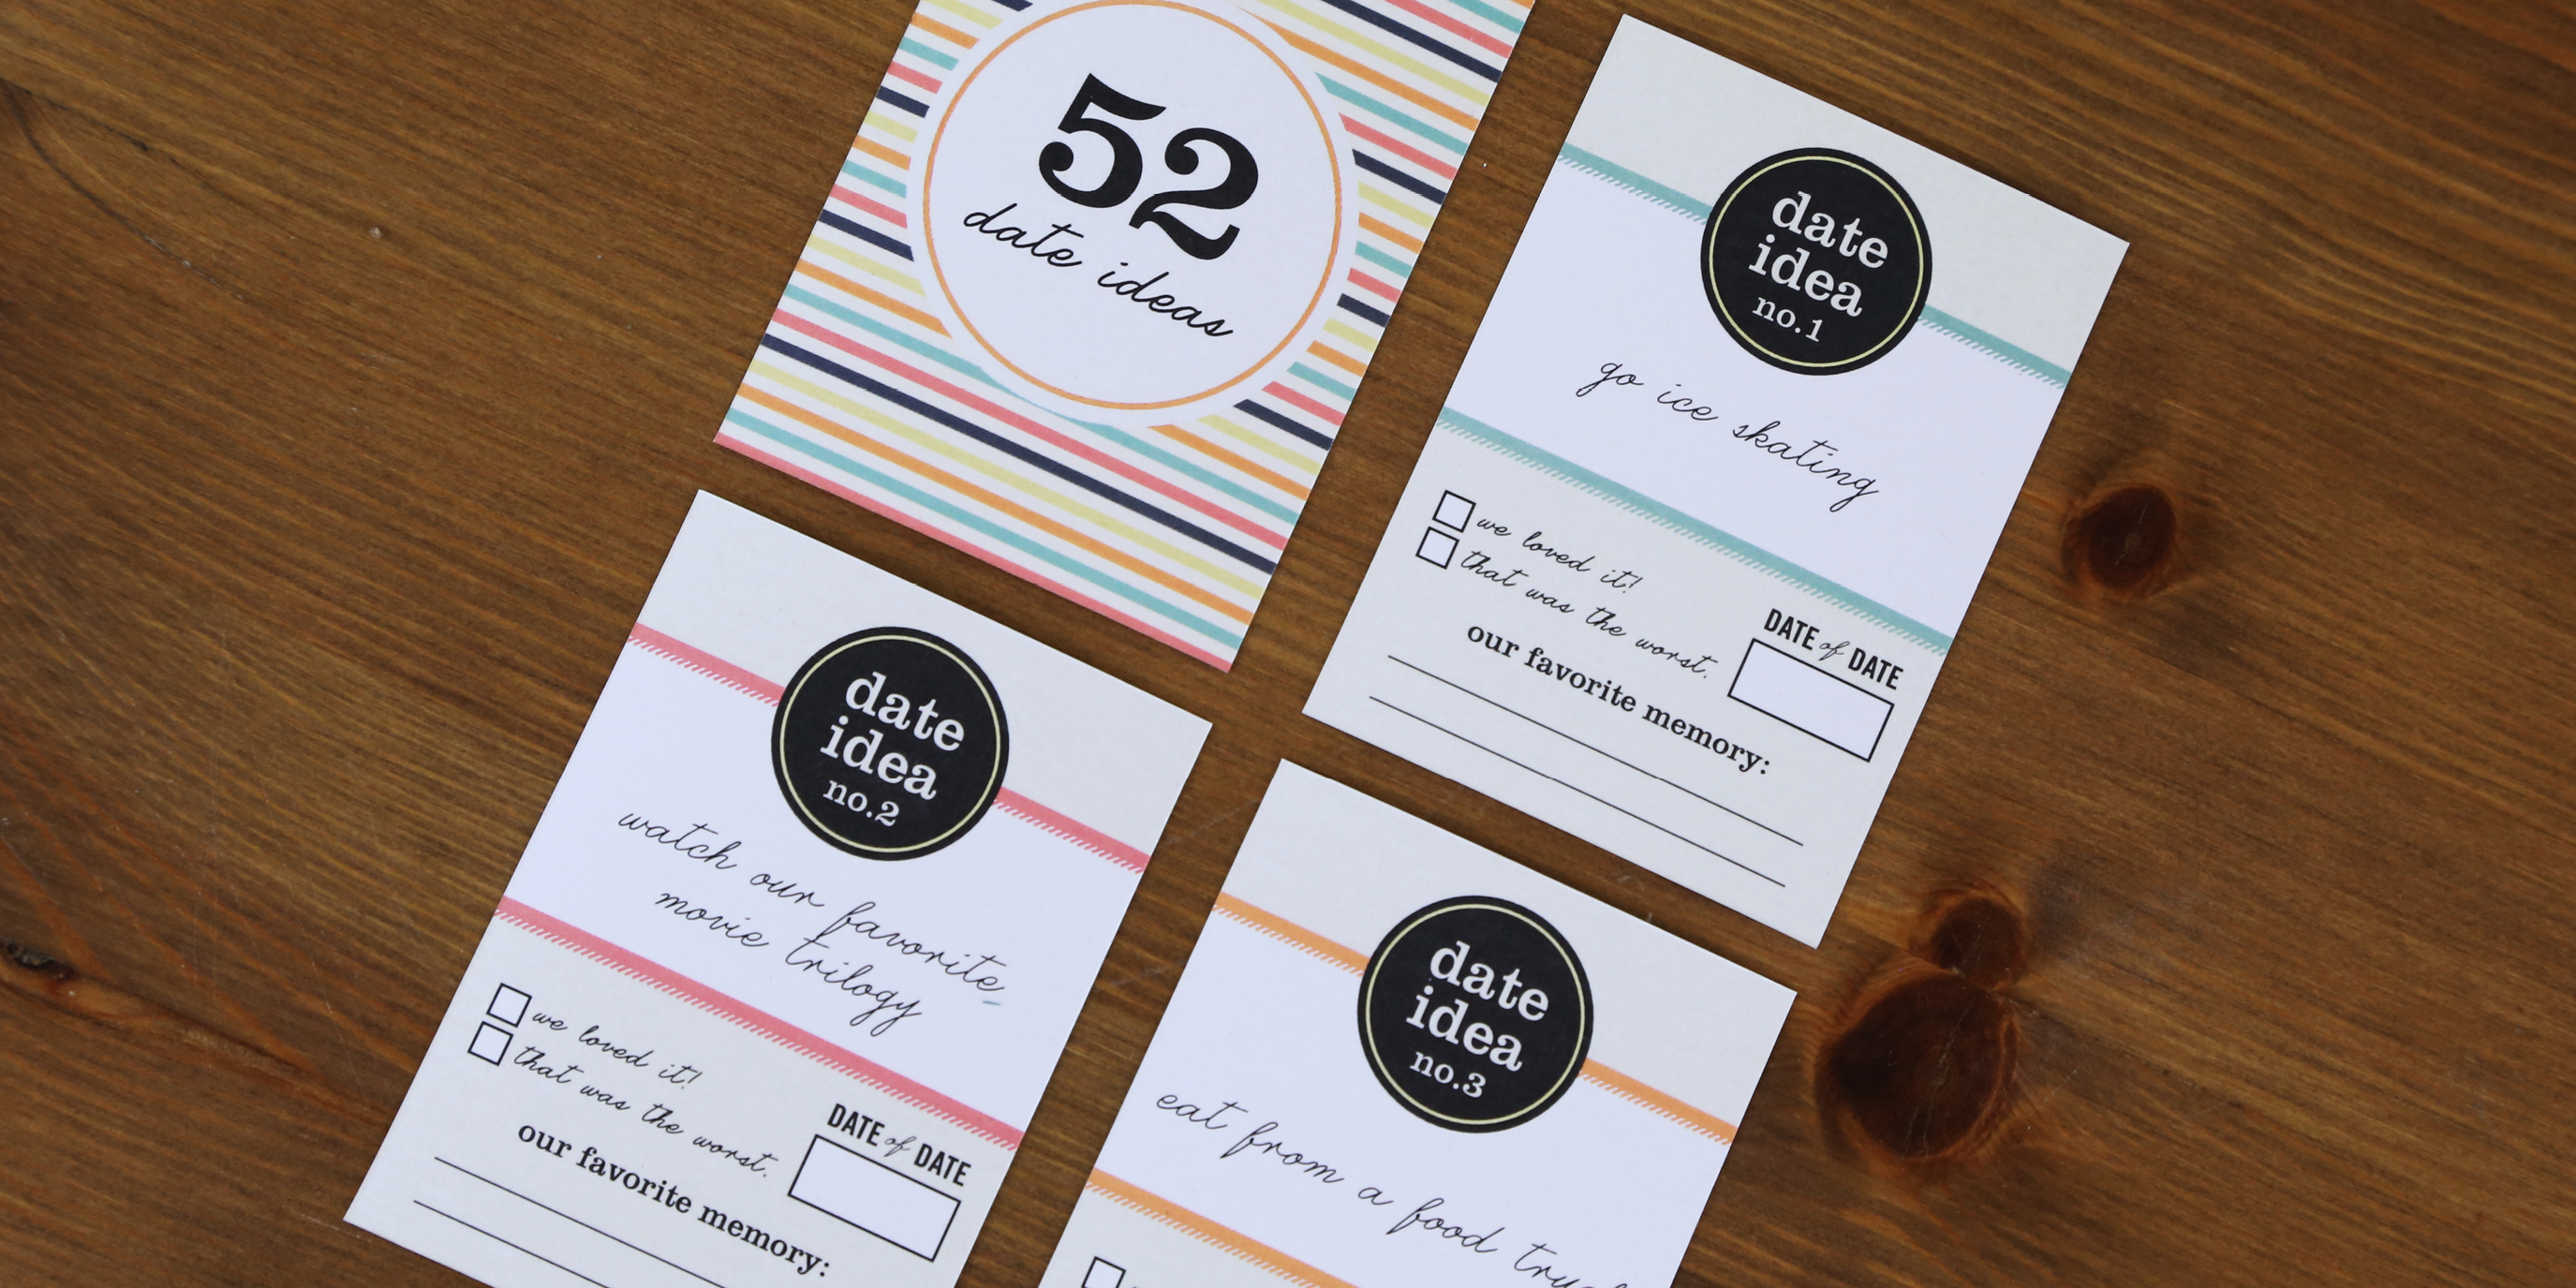 52 Date Idea Card Printable from Elegance and Enchantment